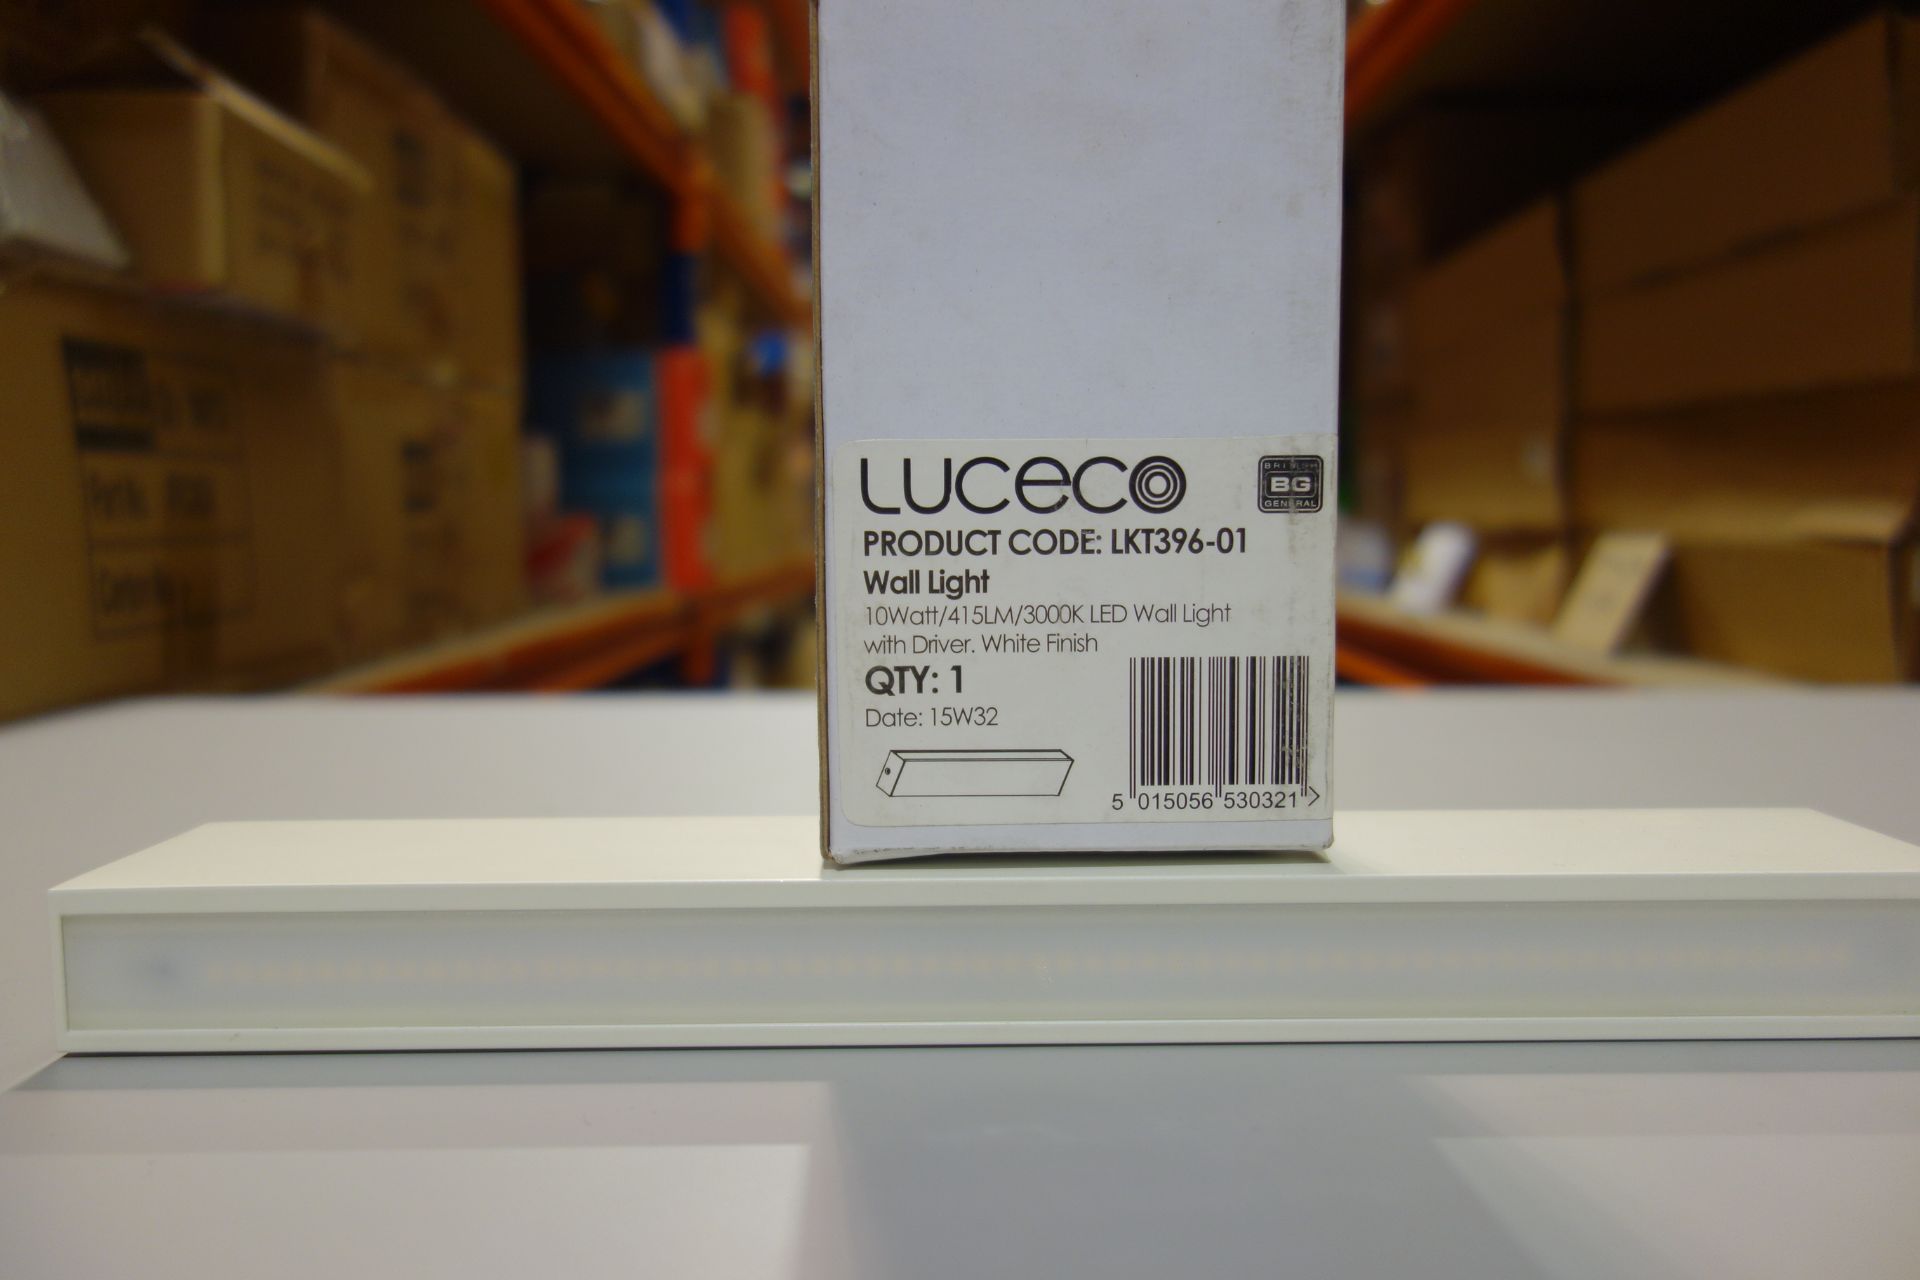 15 x LUCCECO LKT396 -01 10W LED Wall Lights 415 Lumen with Driver White Finish